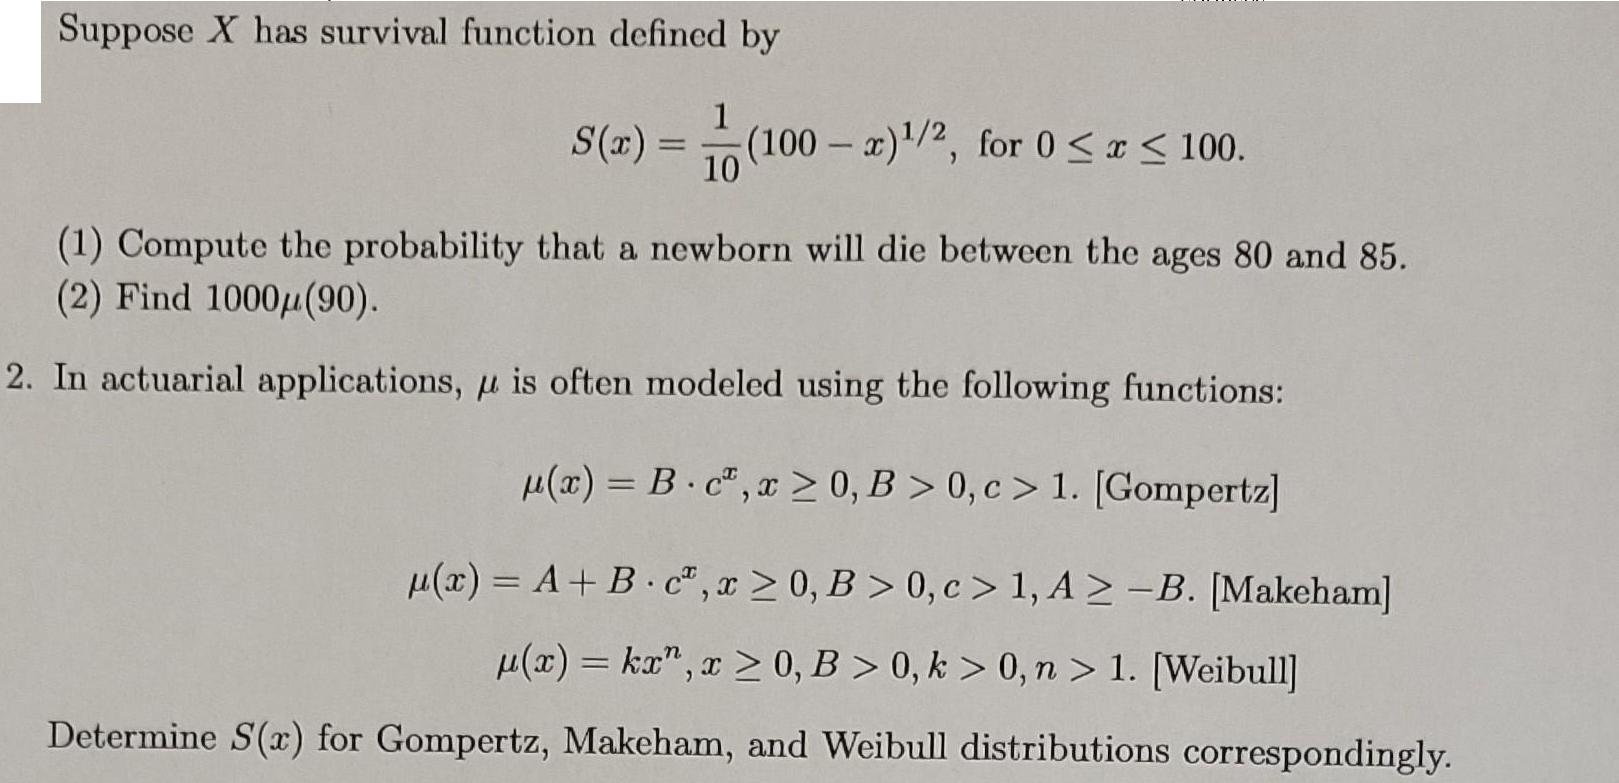 Suppose X has survival function defined by 1 S(x) = (100-a) /2, for 0  x  100. (1) Compute the probability